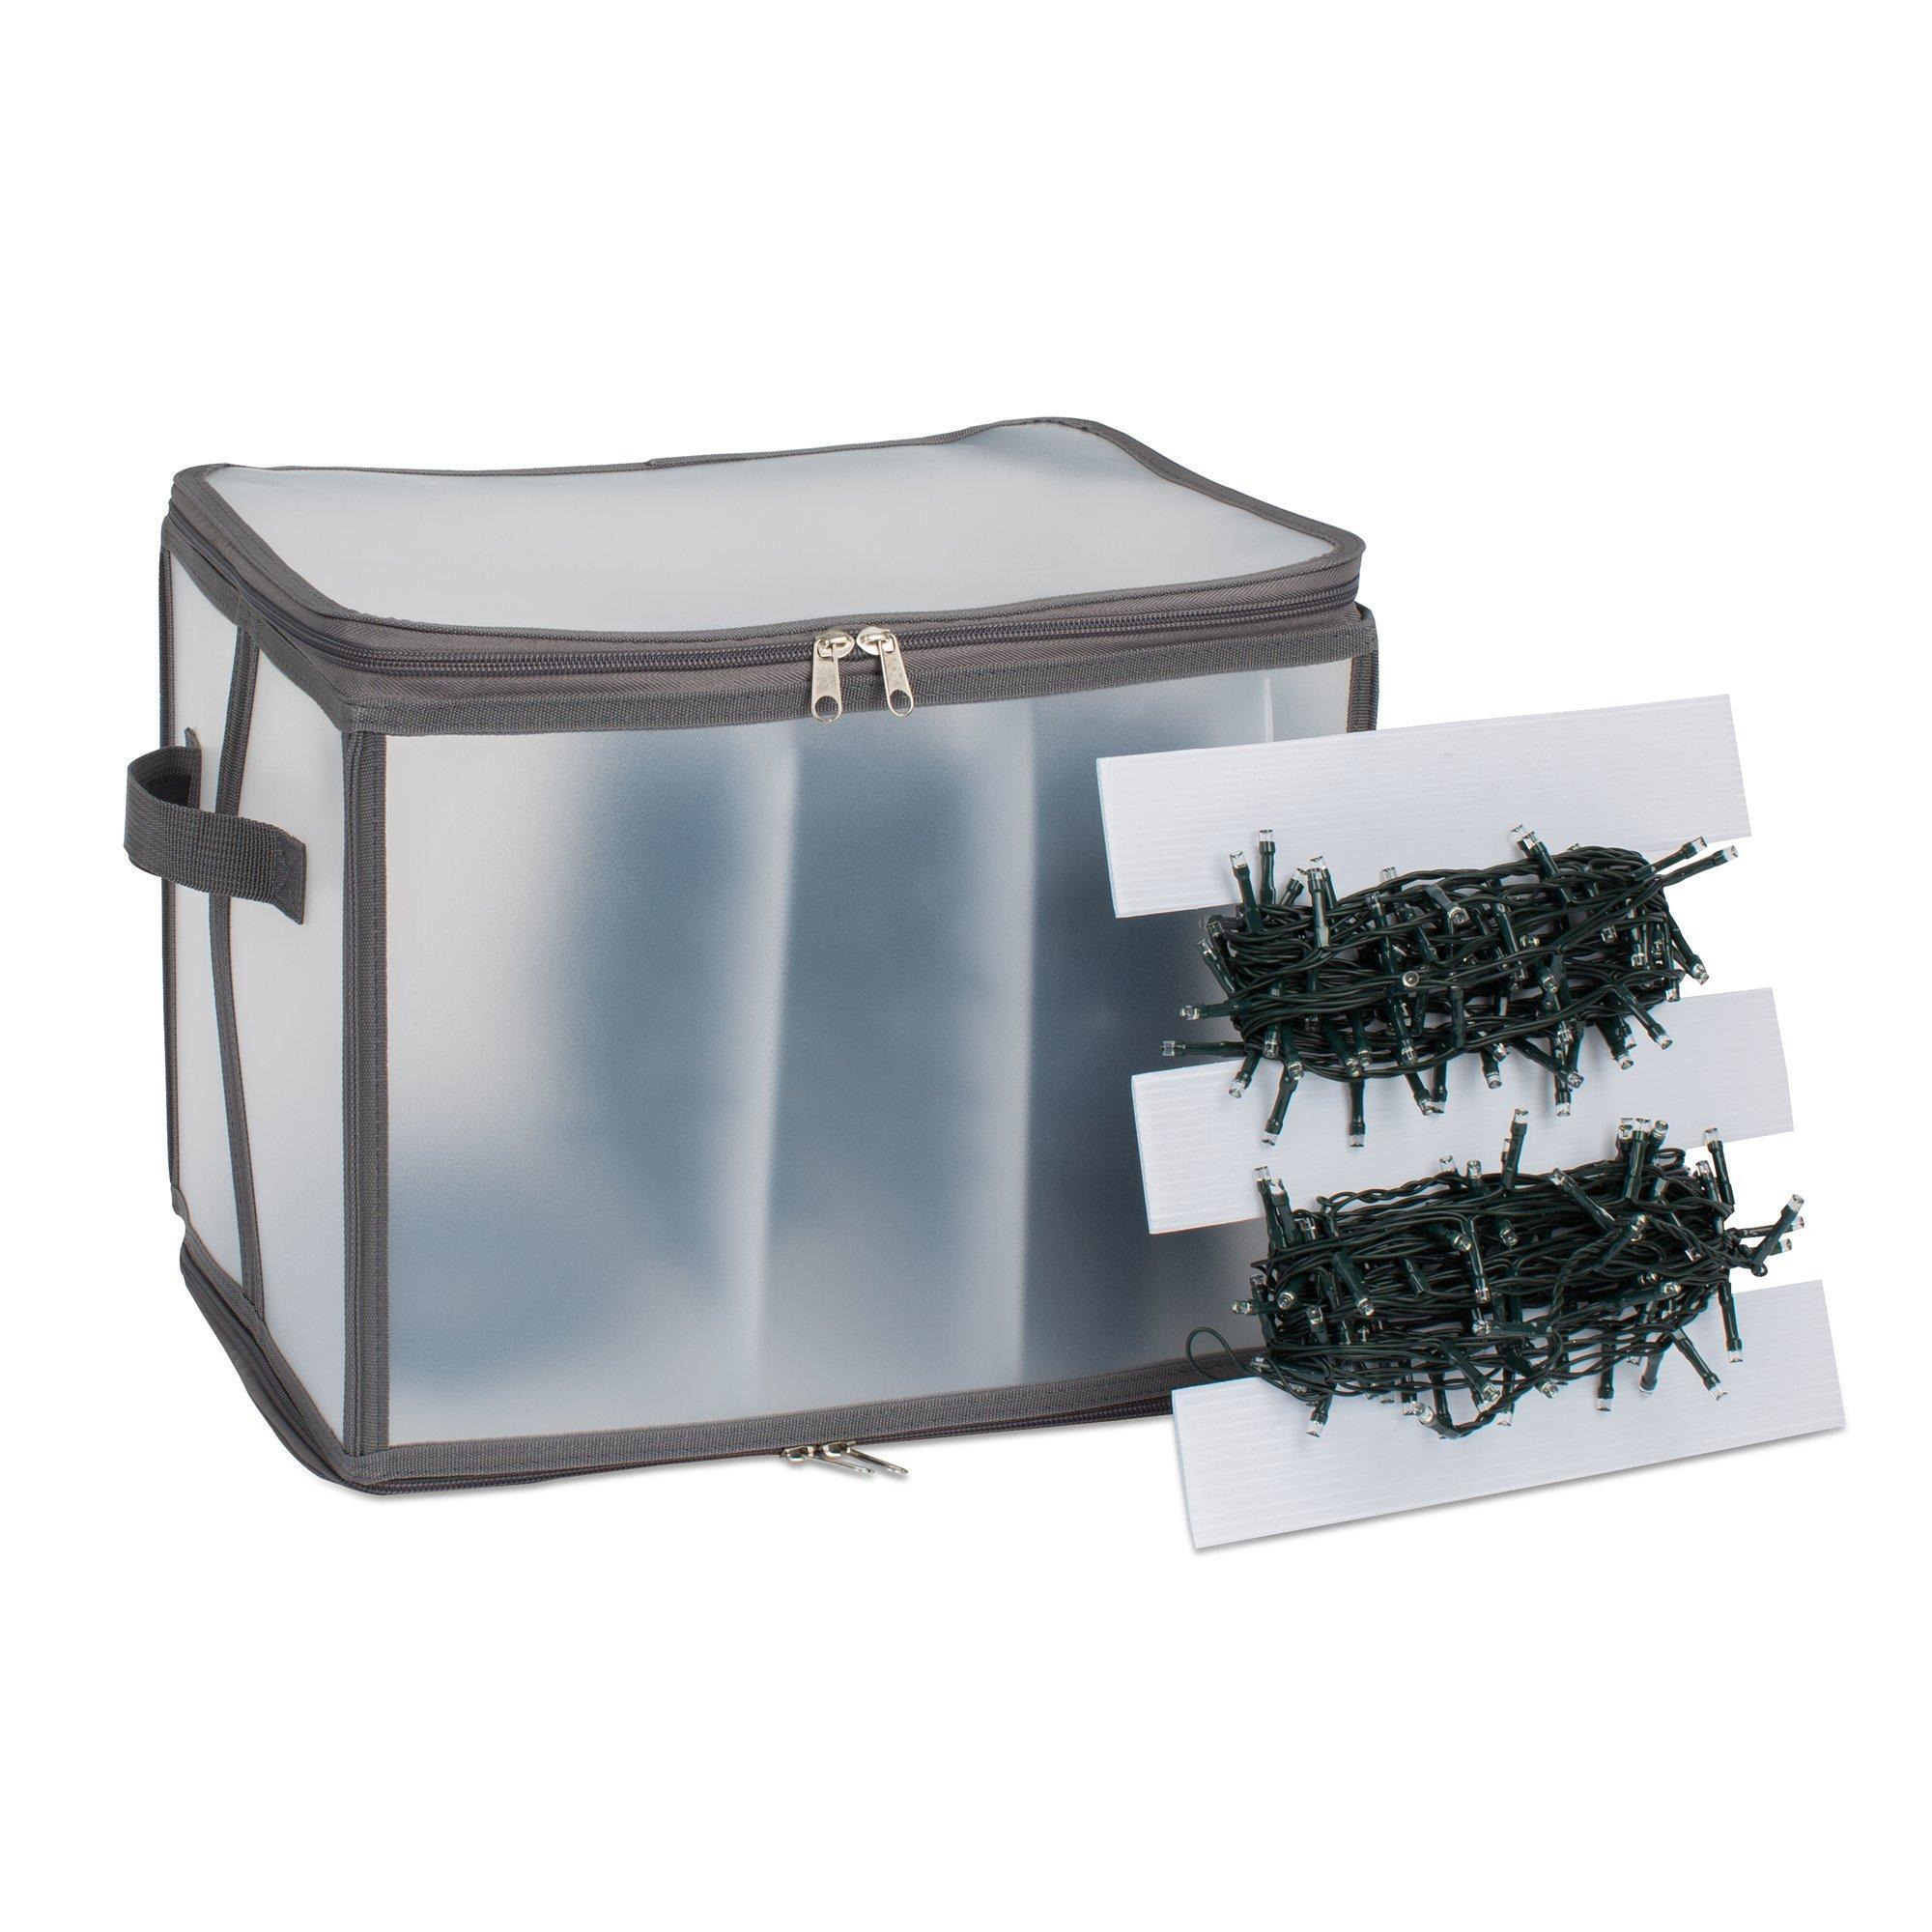 Collapsible Christmas Light & Decorations Storage Cube (32x25x25) - image 1